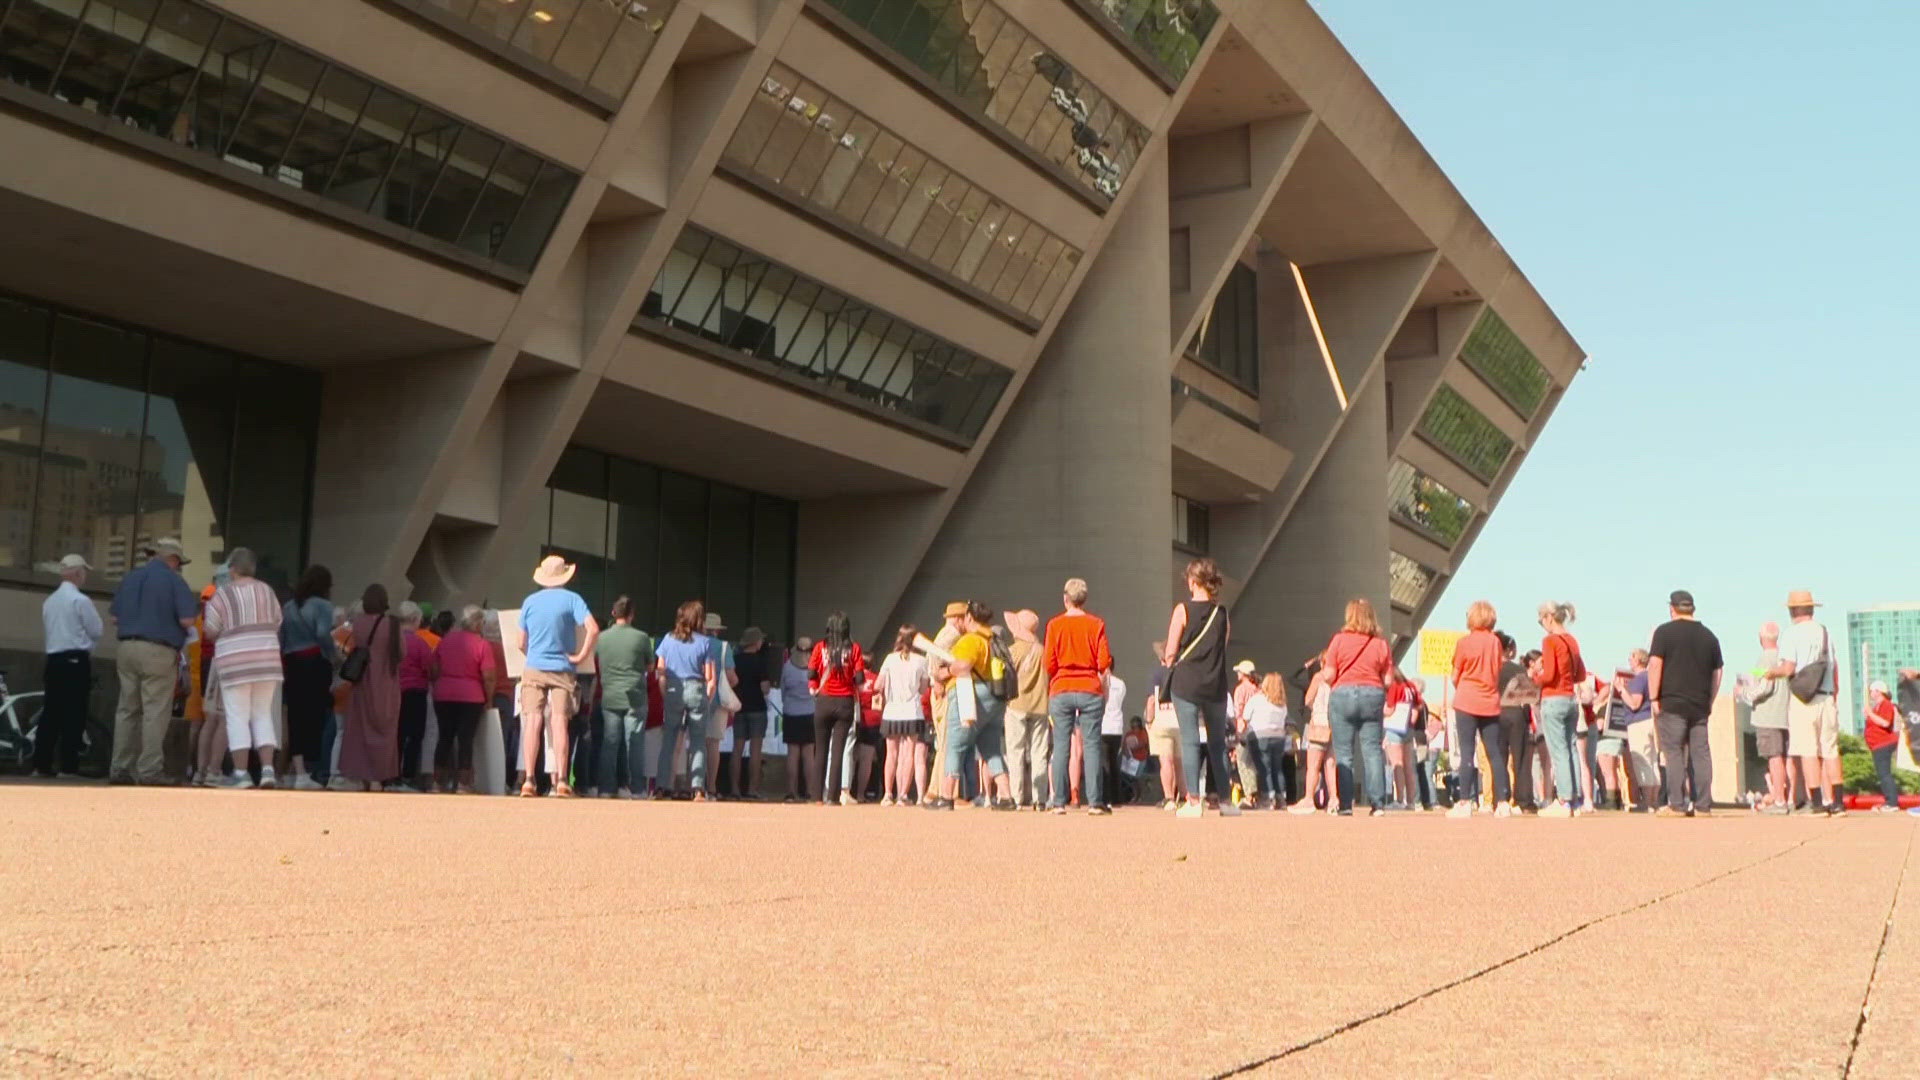 About 150 rallied in front of Dallas City Hall as the nation's best-known gun rights group held its annual meeting next door